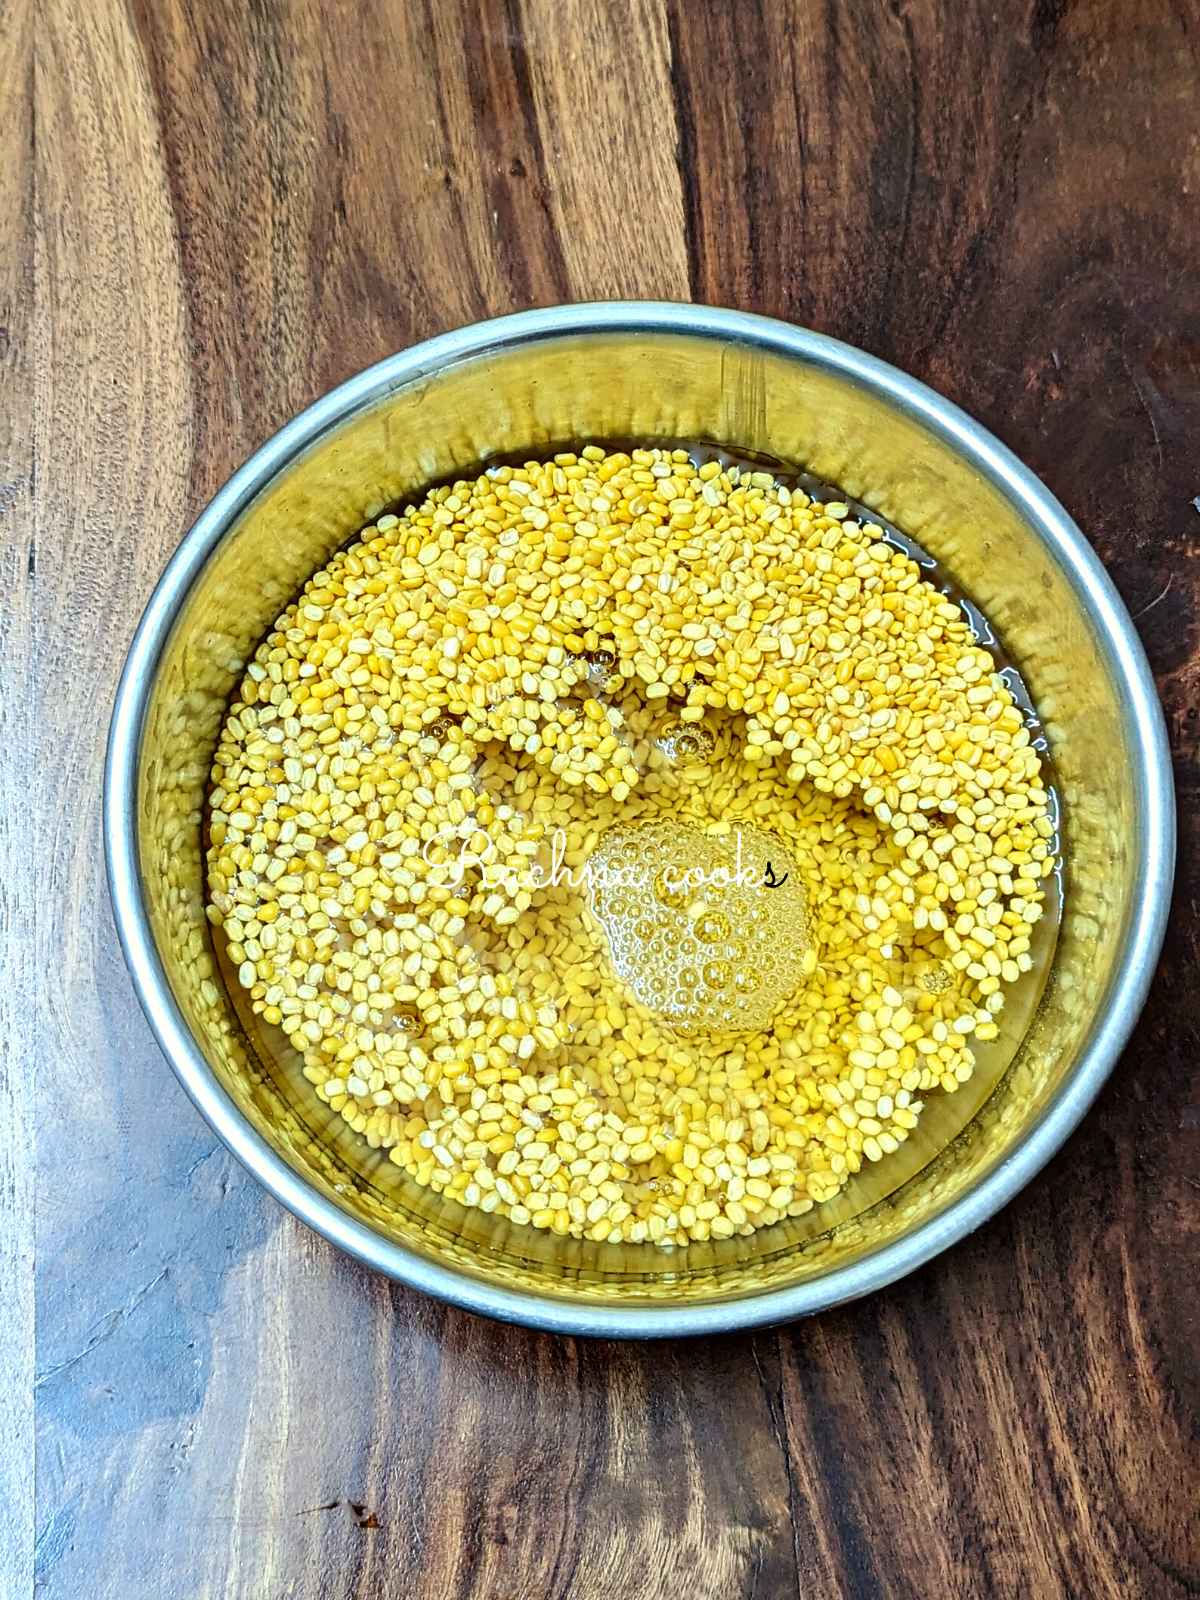 Moong dal lentils soaked in water